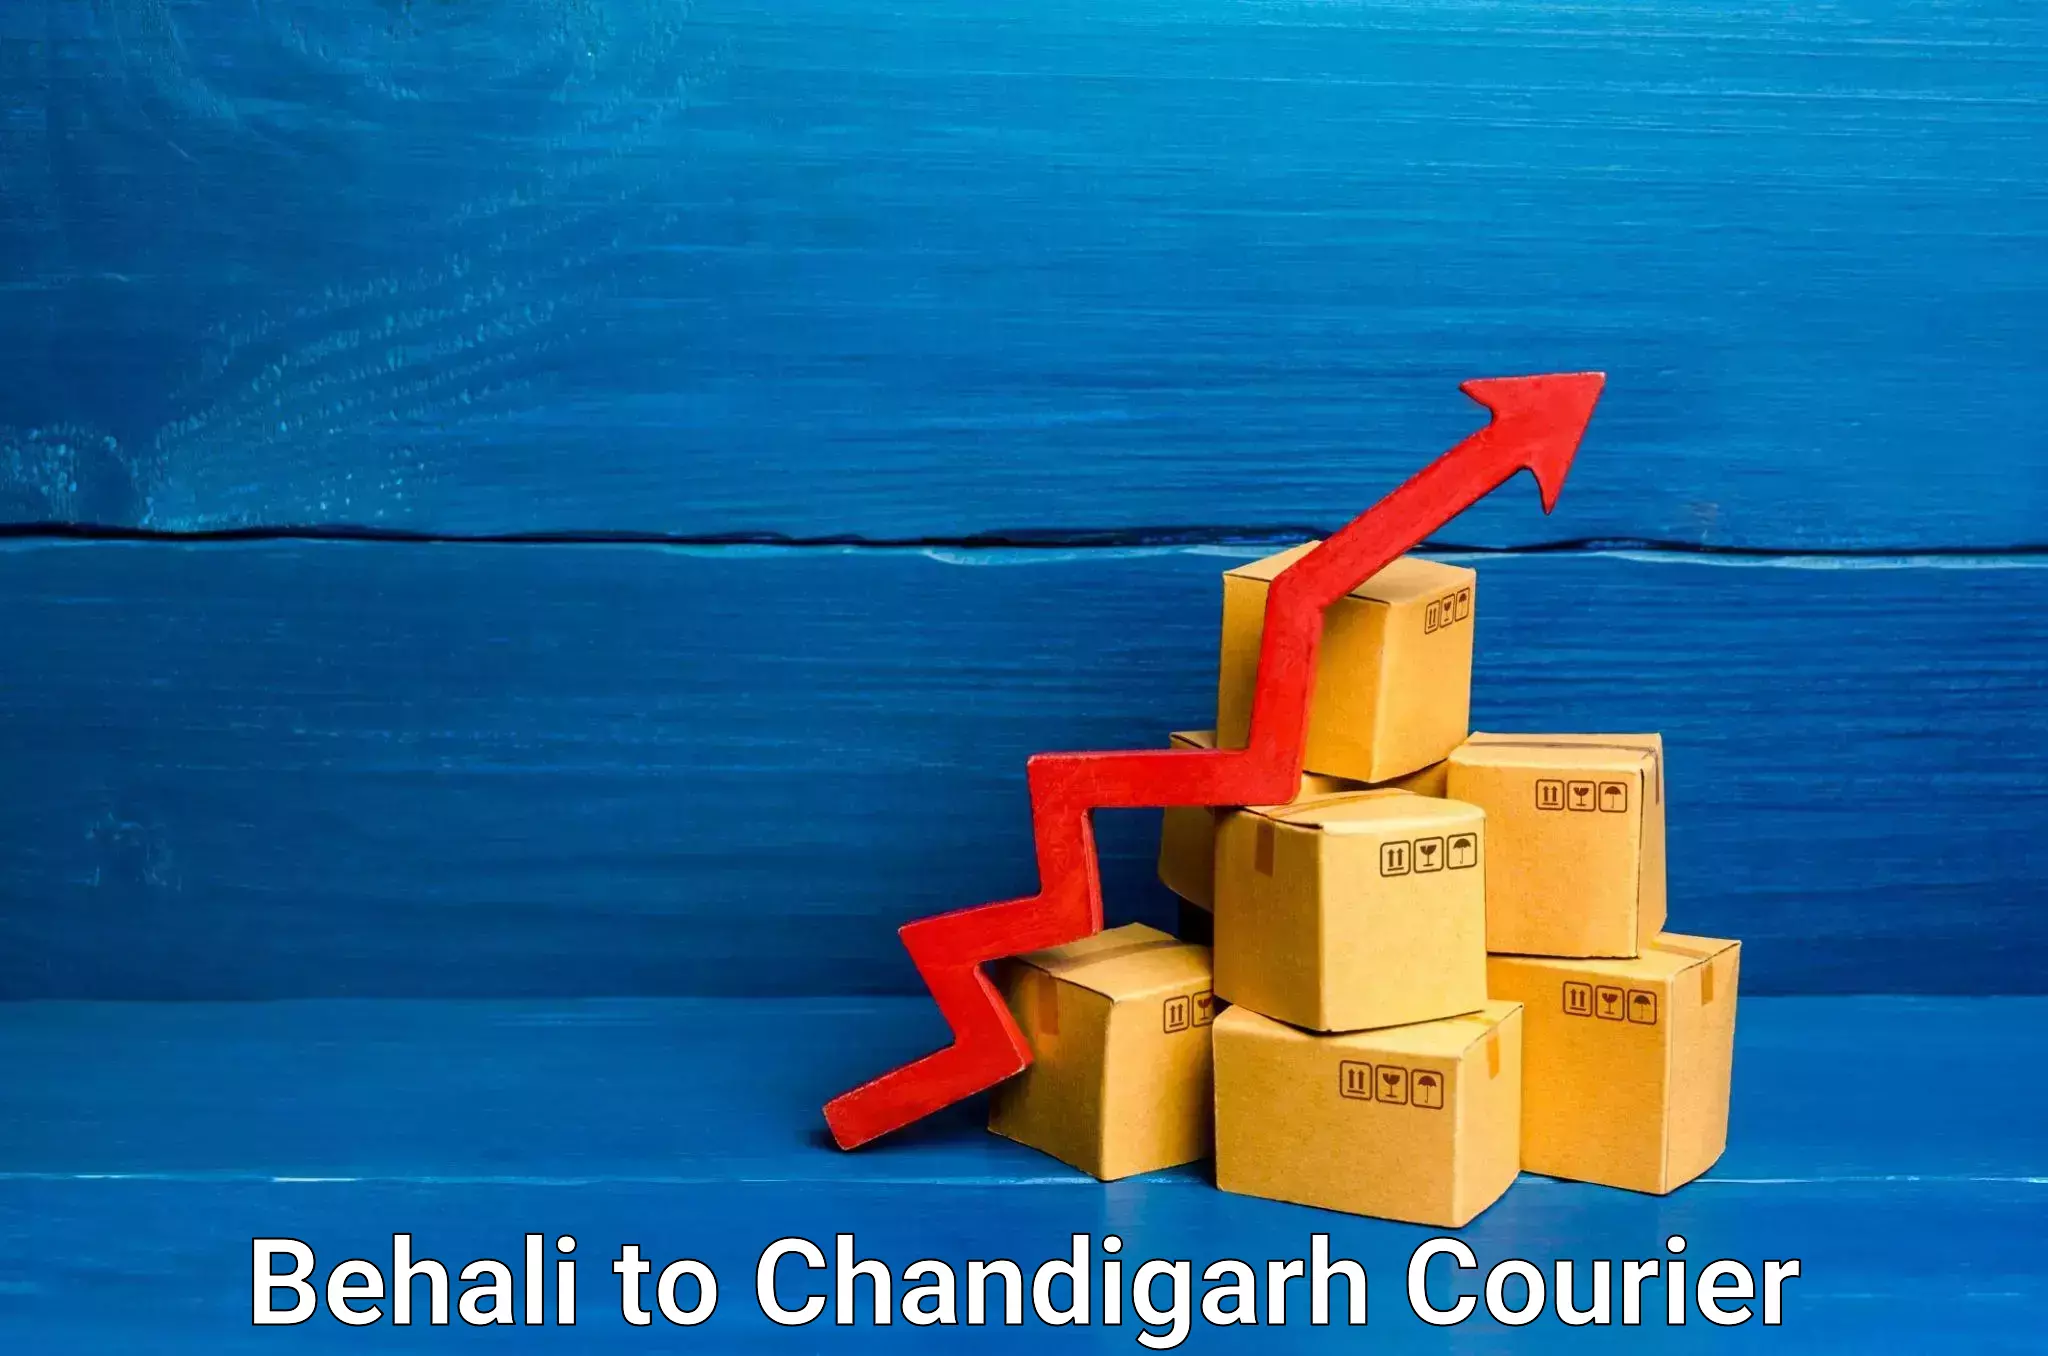 Subscription-based courier Behali to Chandigarh